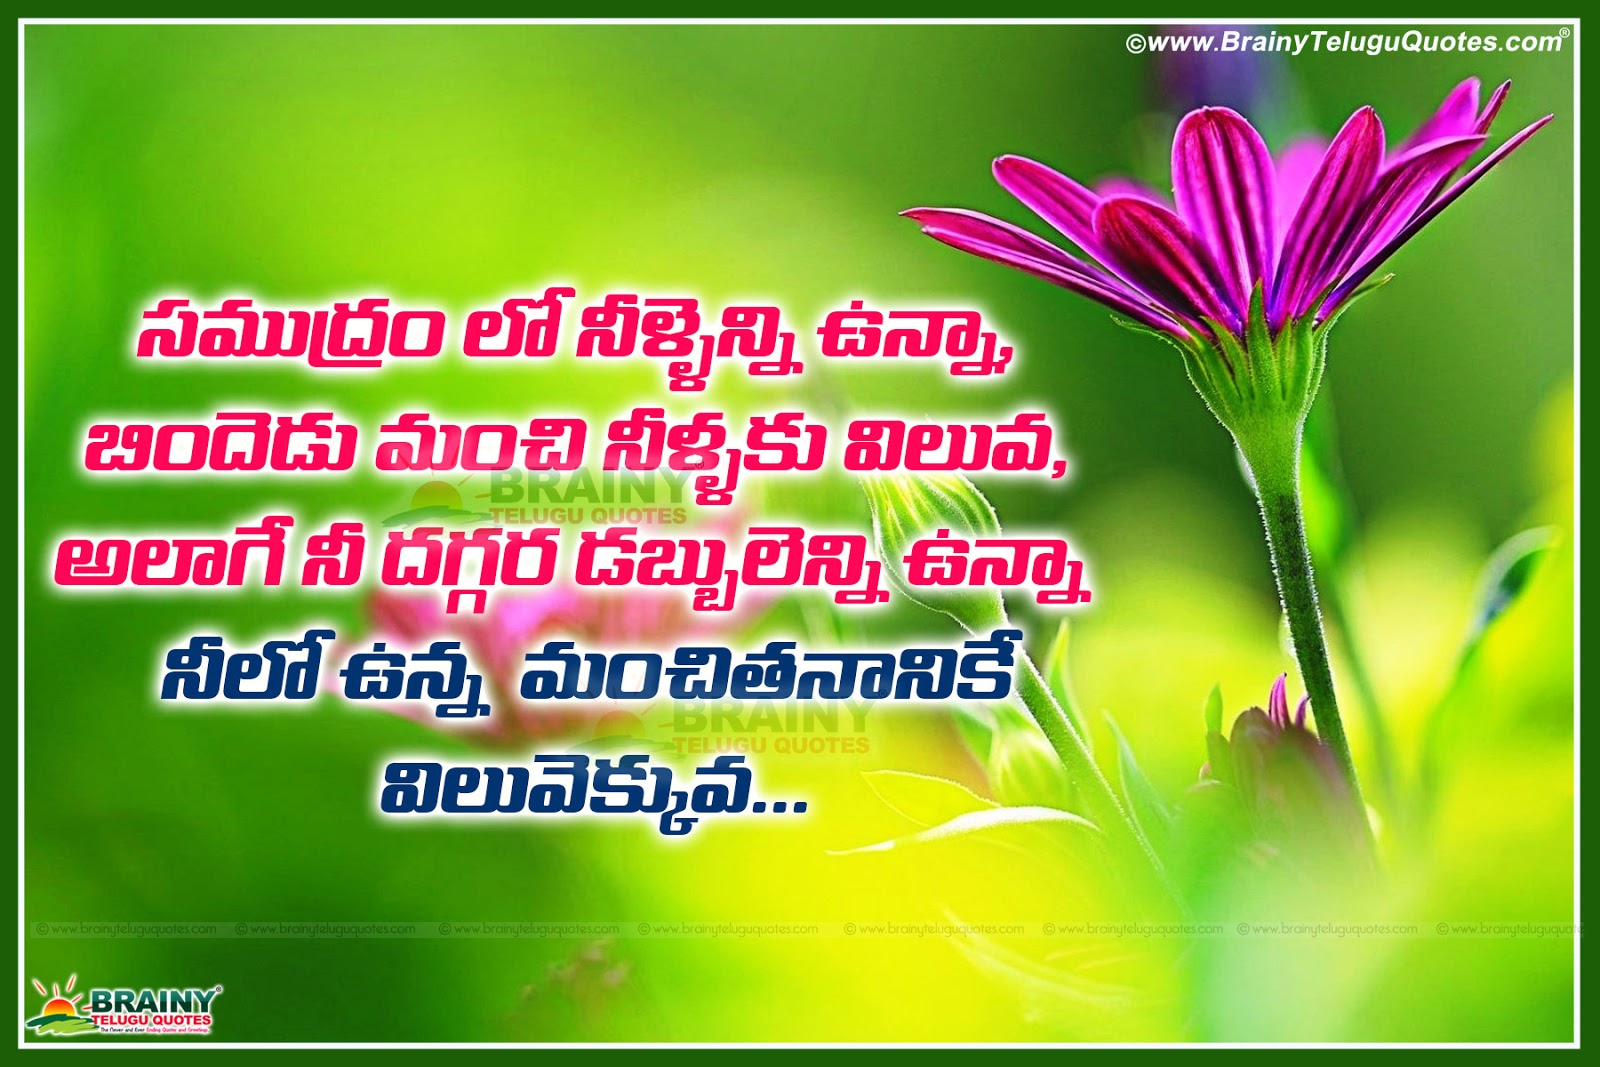 Here a Latest Telugu quotes about Leadership with Leadership Sayings and Inspiring Words in Telugu Top Telugu Good heart Wallpapers and Messages